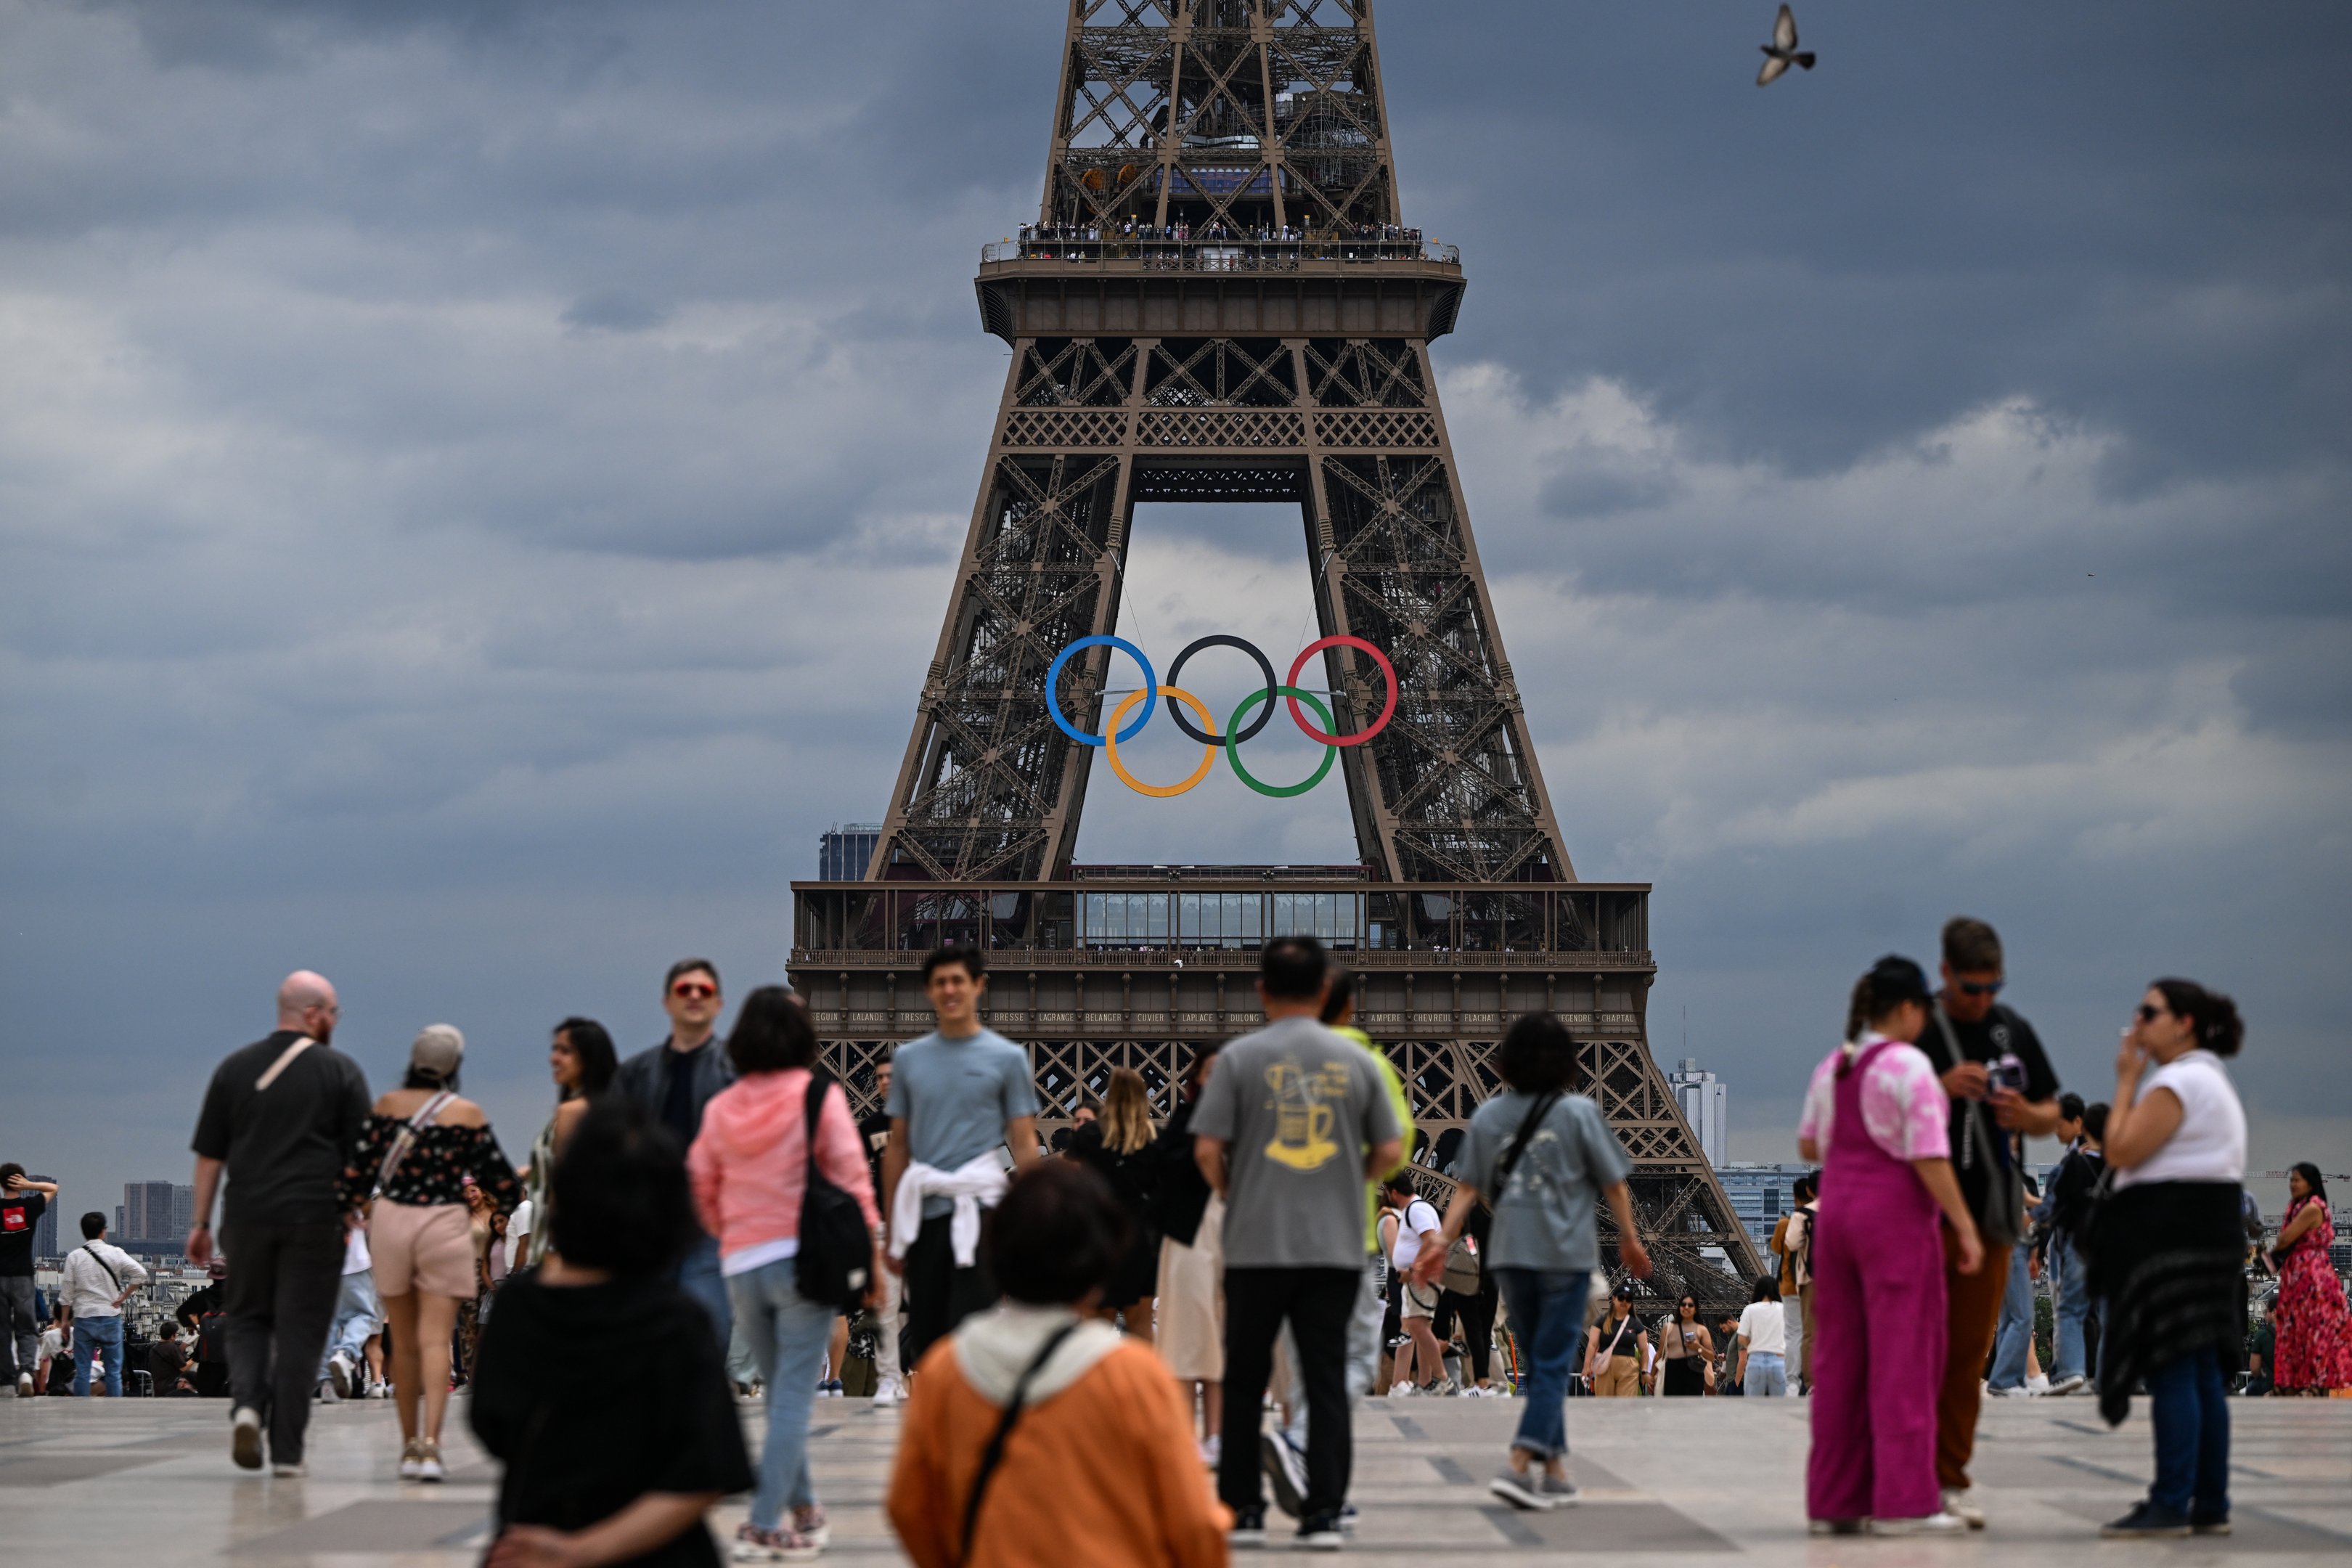 PARIS, FRANCE - JUNE 30:   
Tourists at Trocadero Plaza admire the Eiffel Tower adorned with Olympic rings, celebrating the upcoming Paris 2024 Olympic and Paralympic Games, on June 30, 2024 in Paris, France.
Paris anticipates over 11 million visitors for the XXXIII Olympic Summer Games, primarily from France, as the city prepares for the event from July 26 to August 11 (Photo by Artur Widak/NurPhoto via Getty Images)